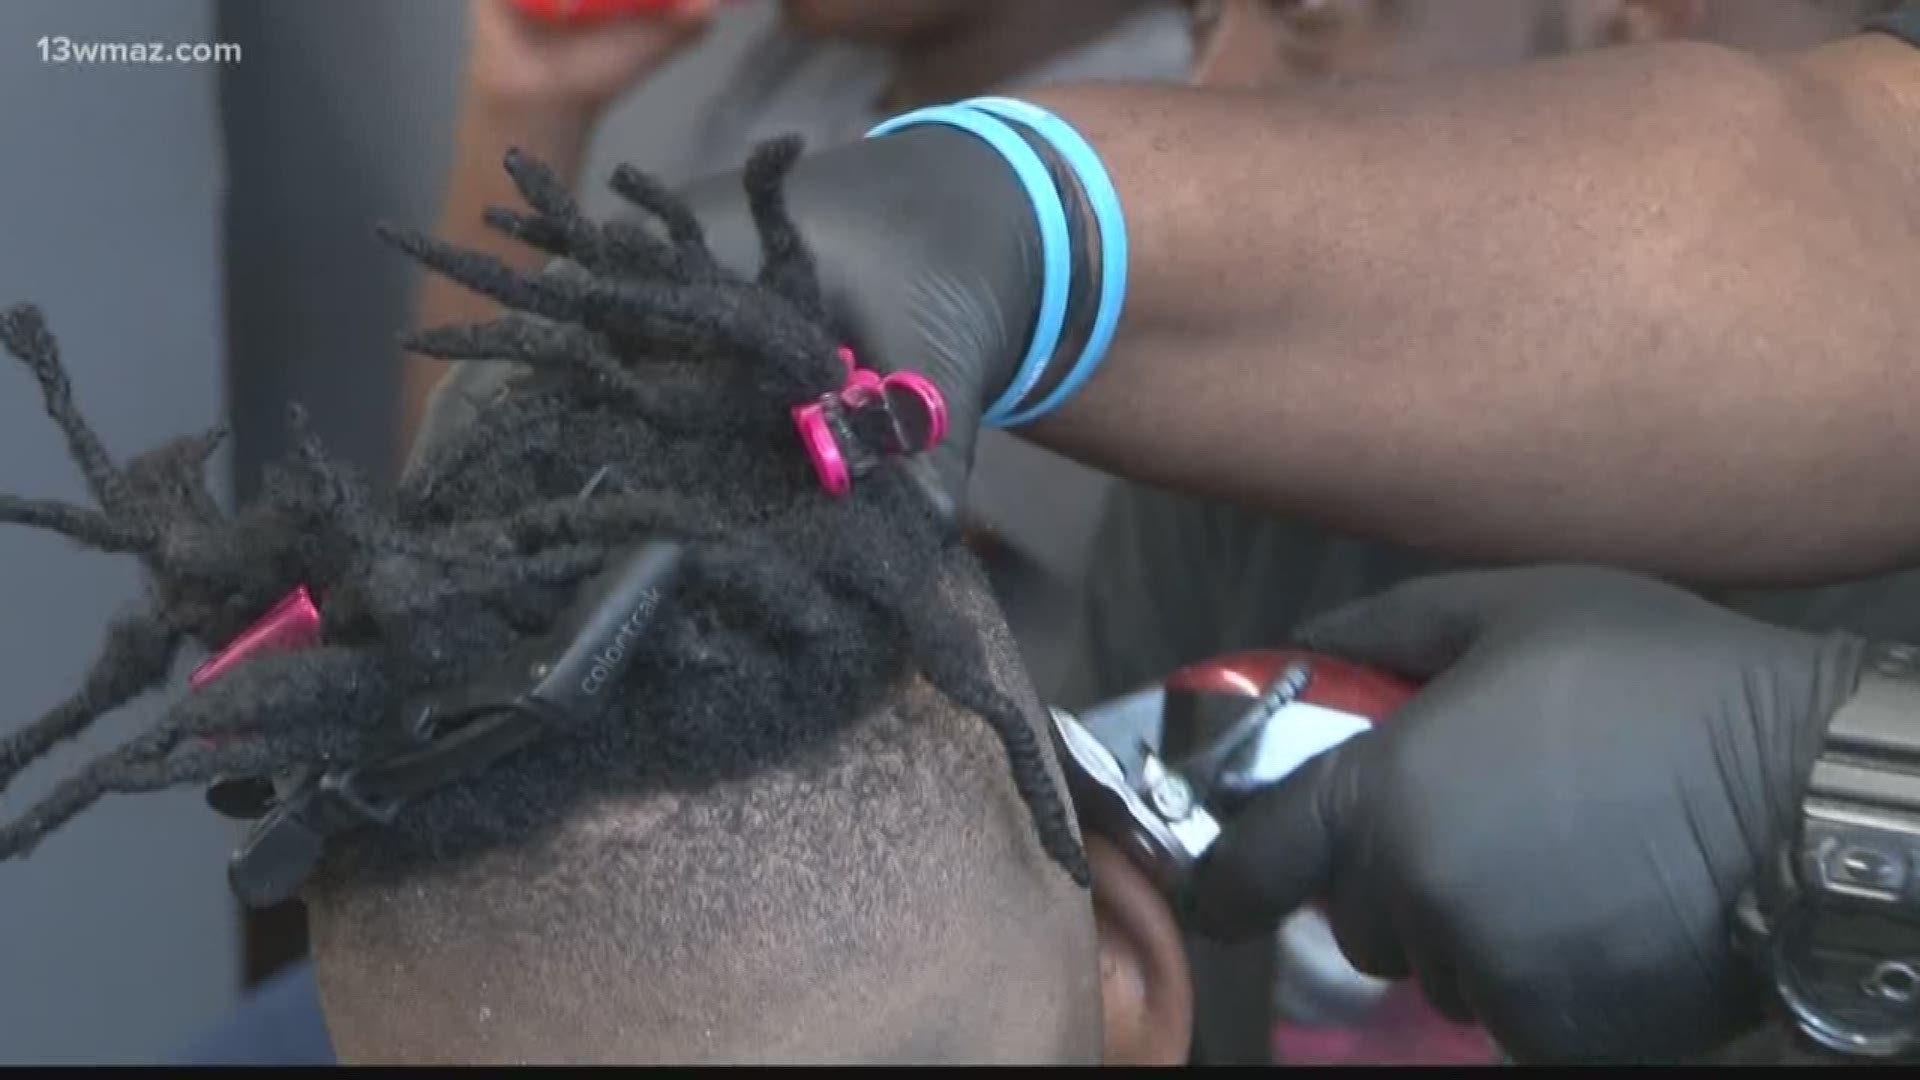 NFL Player Bud Dupree took some time off the field to sponsor an event Sunday. He teamed up with V-J Cutz and Styles Barbershop and Guap Records to give 100 students free haircuts and food.